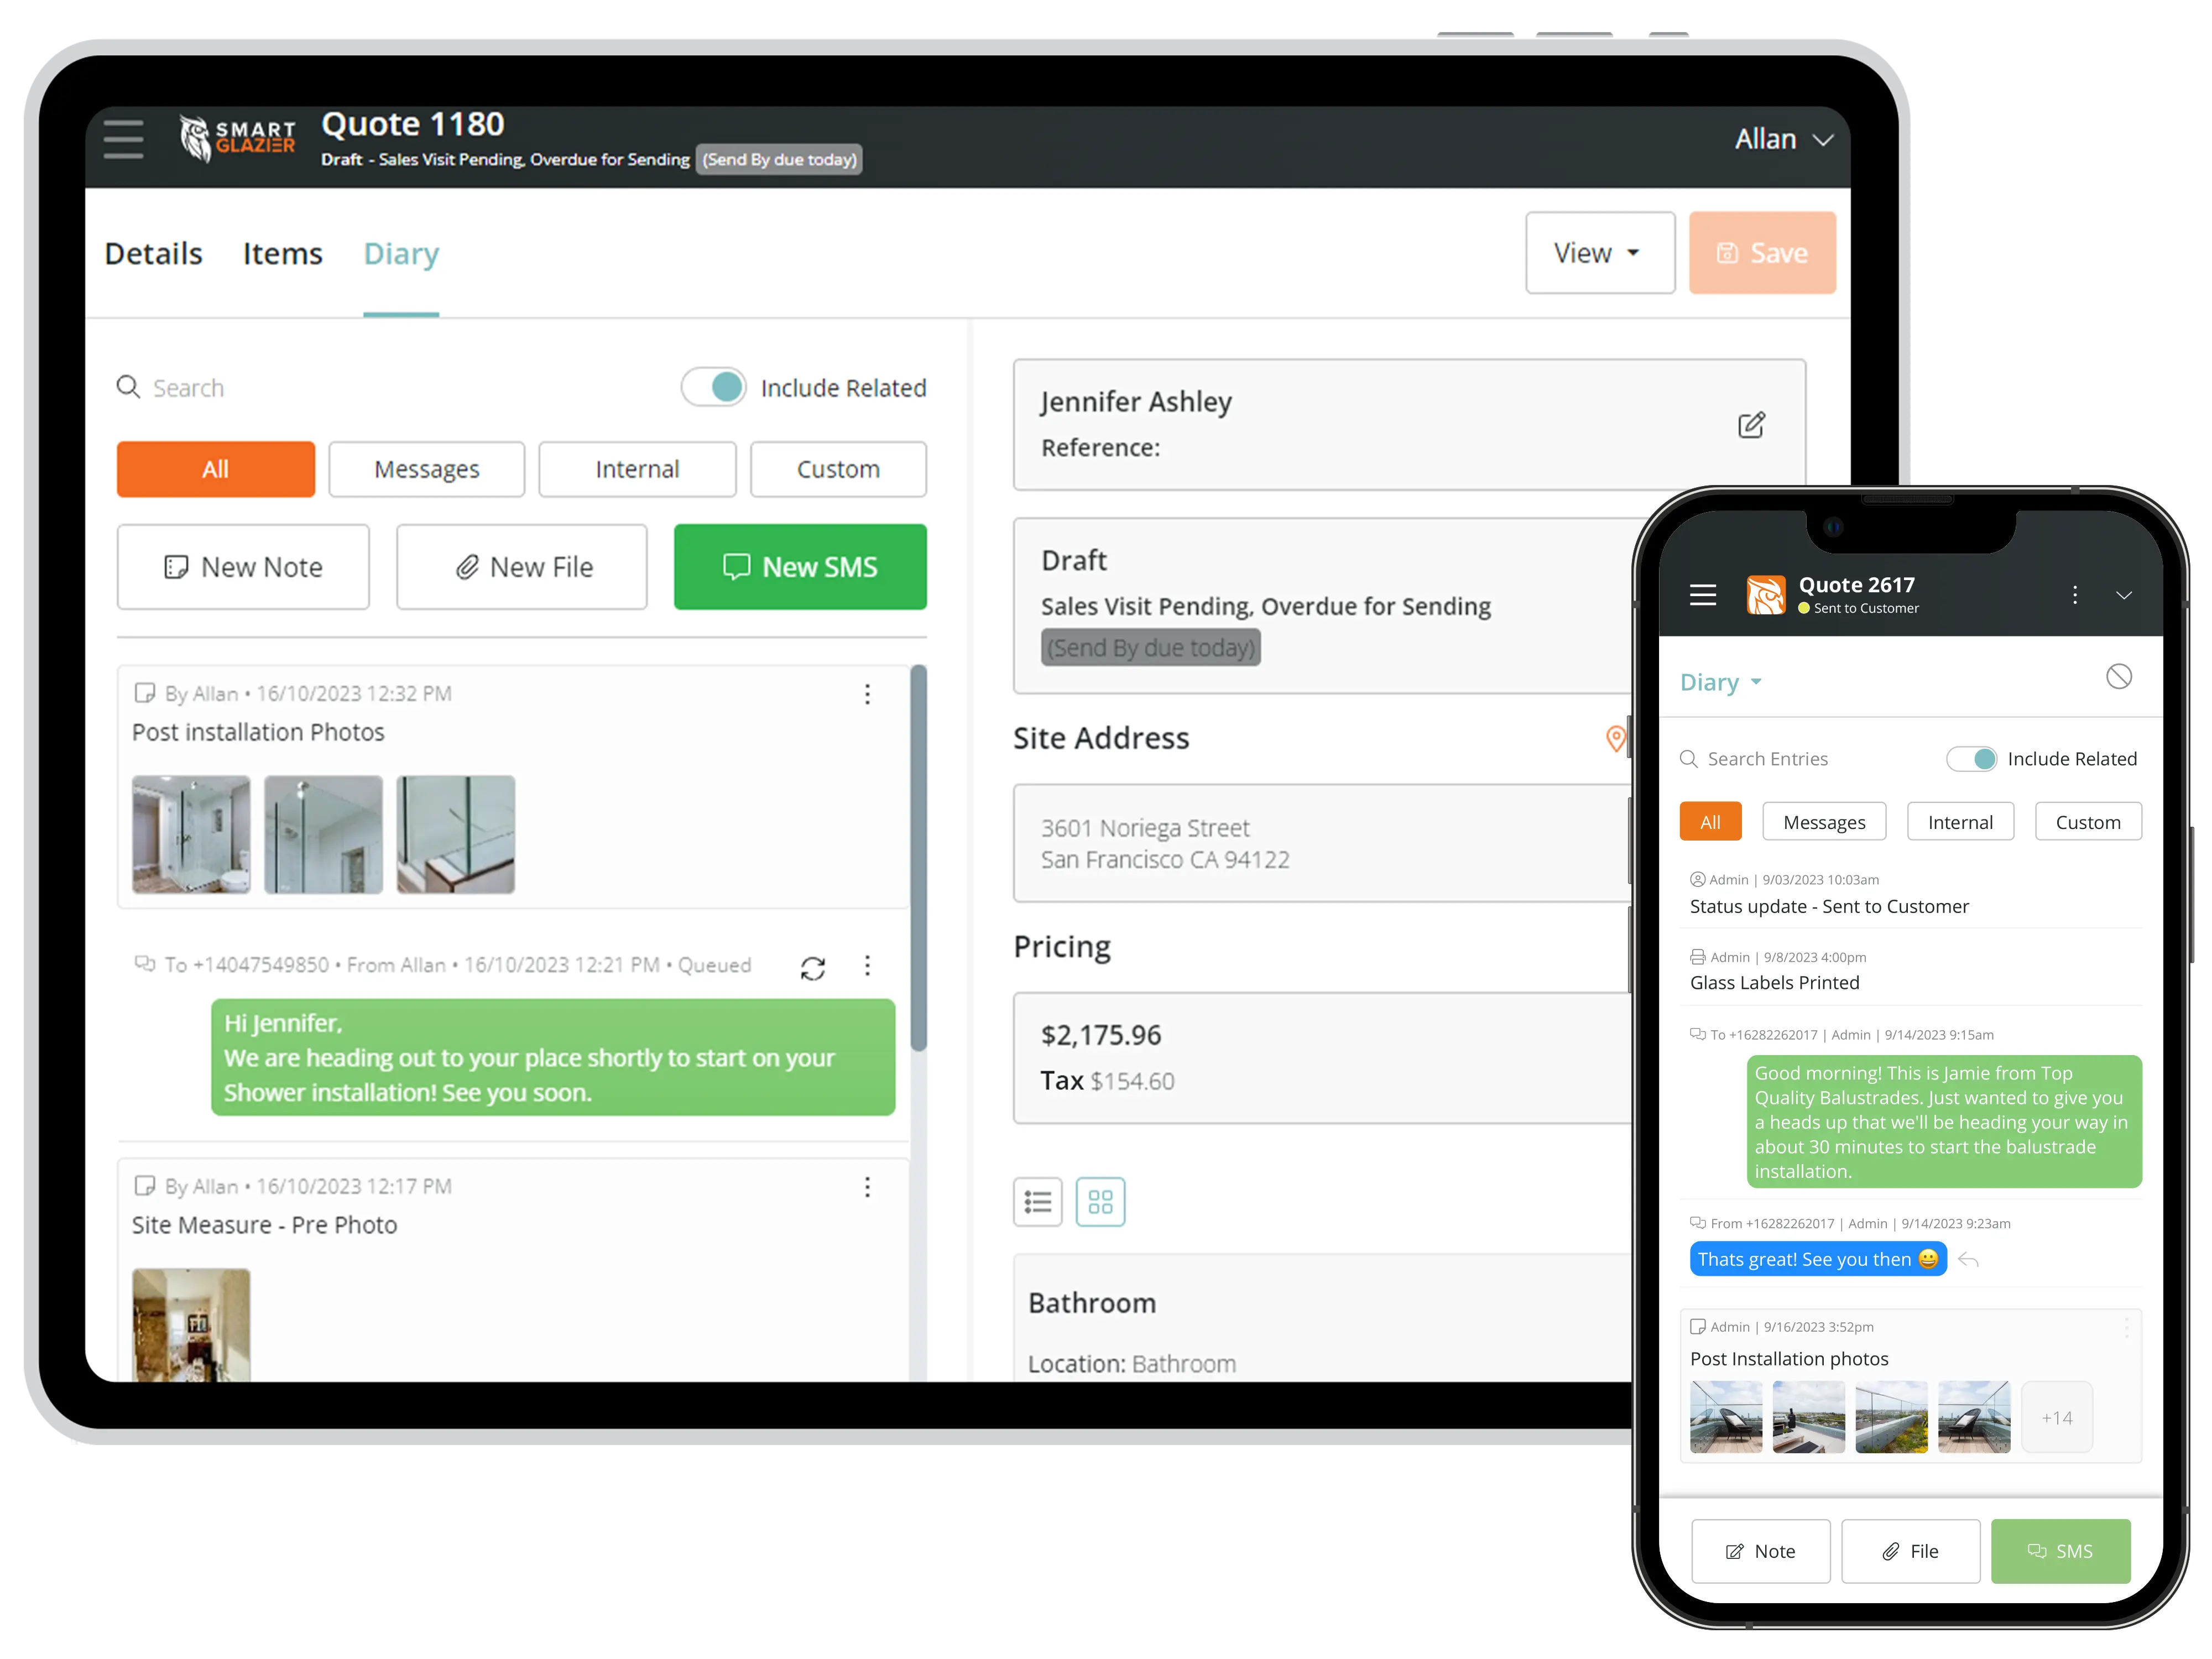 Smart Toolbox gives you a central hub for all of your job data and management